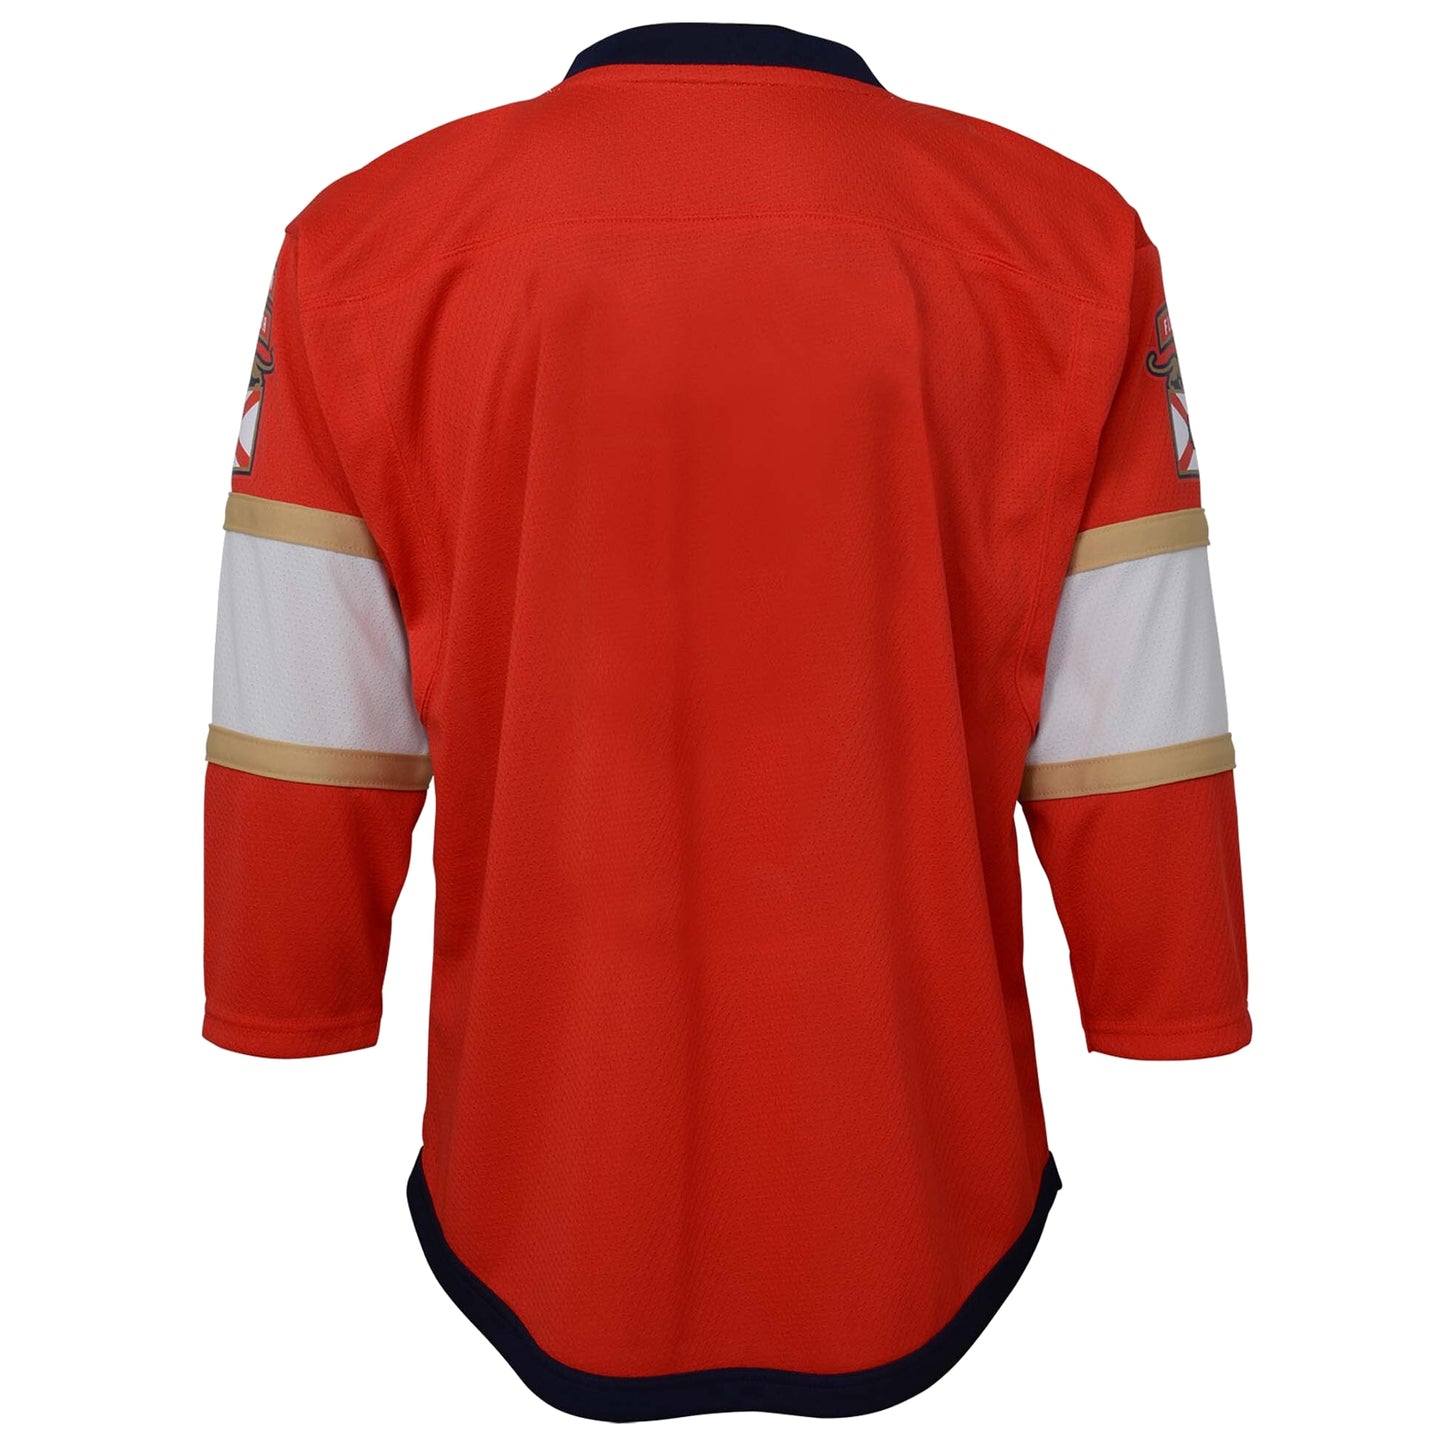 Florida Panthers Youth Home Replica Blank Jersey - Red